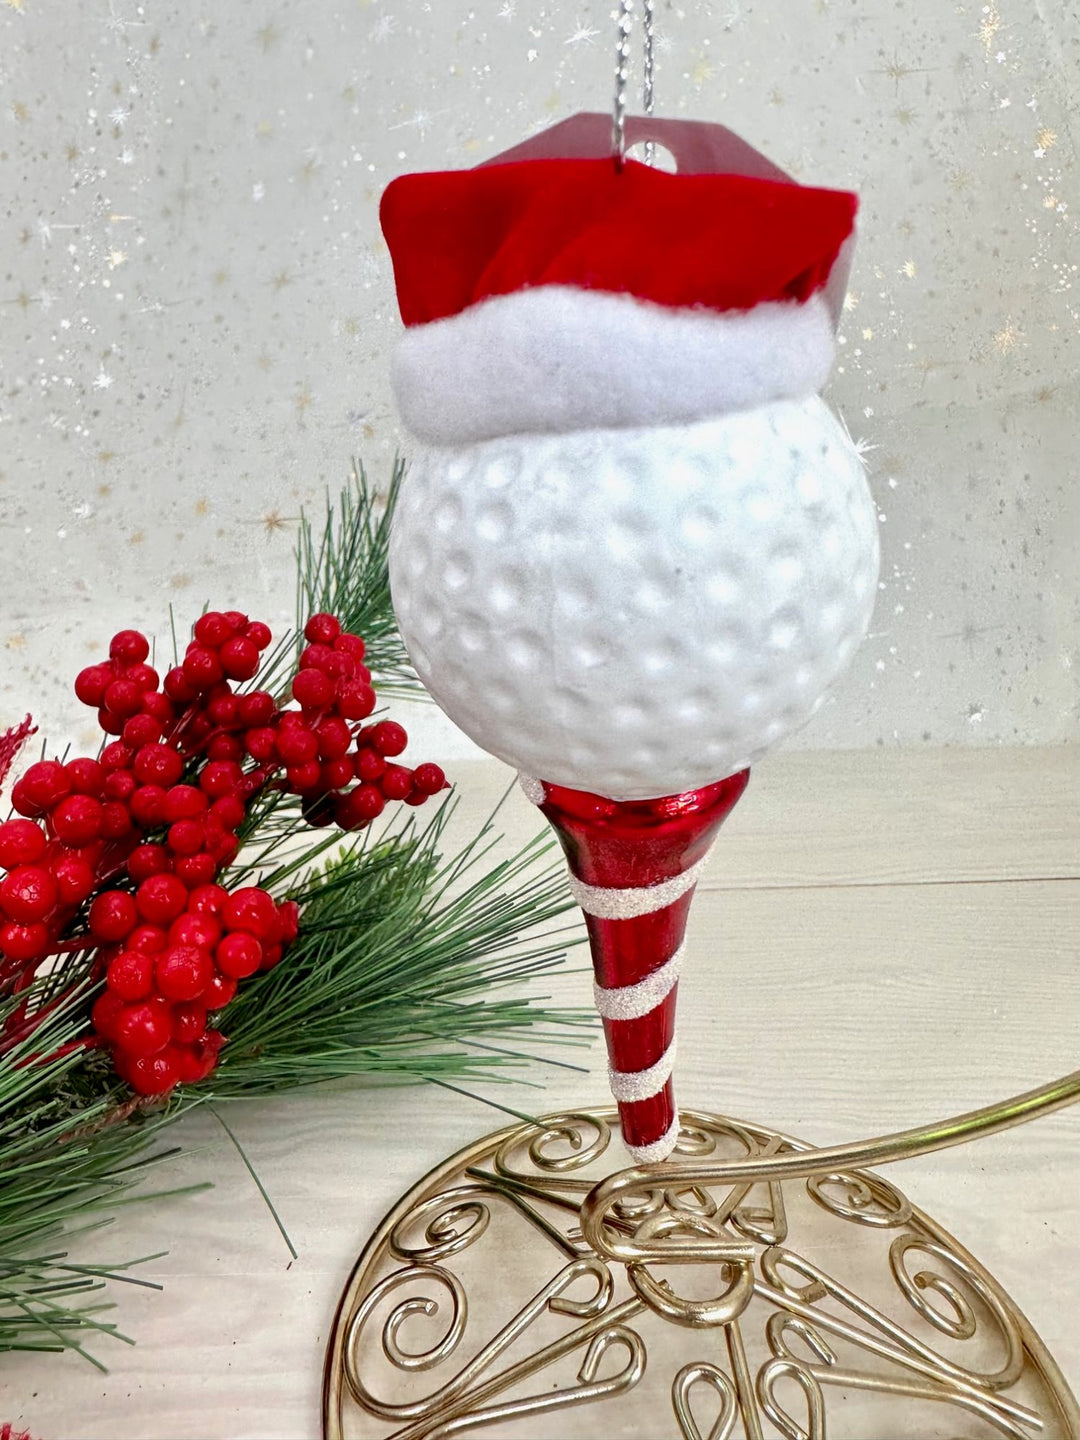 Golf Ball and Tee with Santa Hat Figurine Ornaments, 1/Box, 6/Case, 6 Pieces